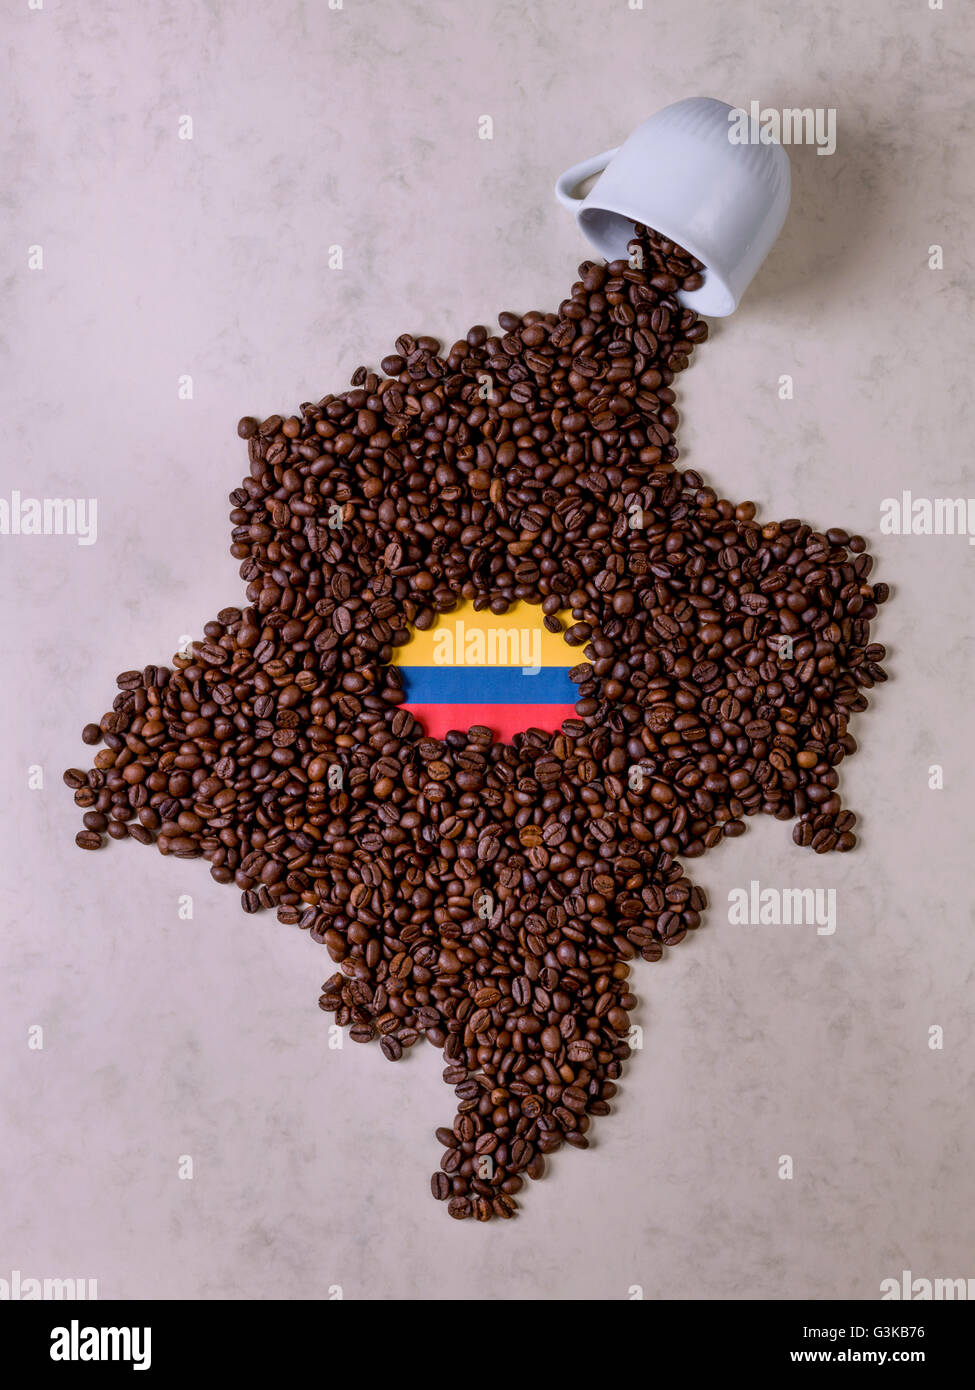 Fall cup coffee, coffee beans forming the map of Colombia Stock Photo